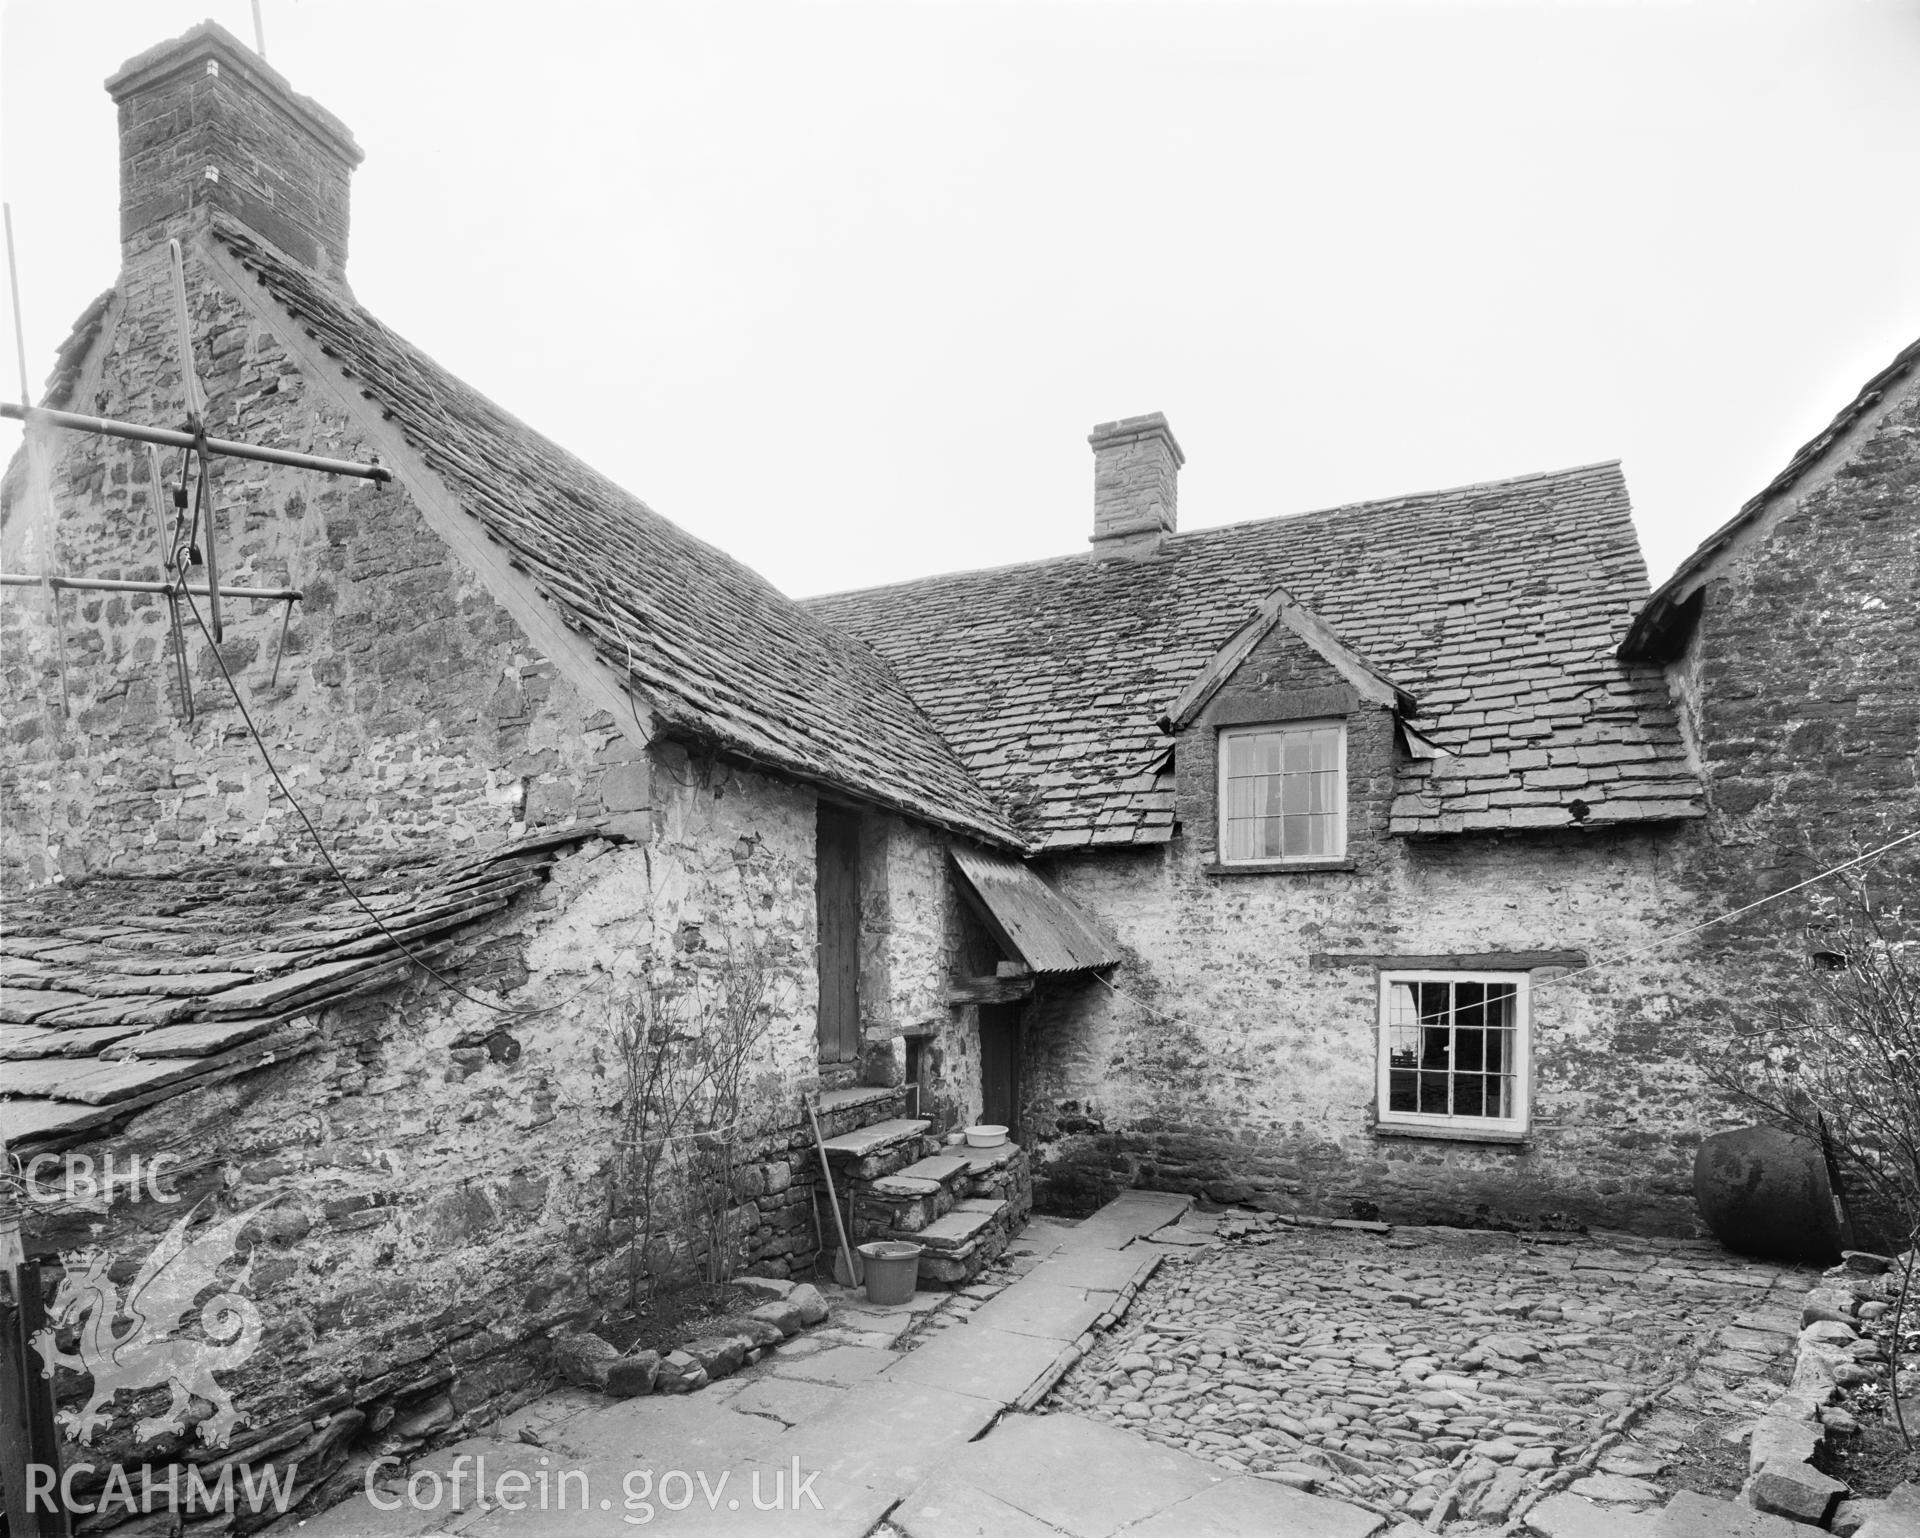 Farmhouse, exterior view from the rear showing medieval hall and cross-wing